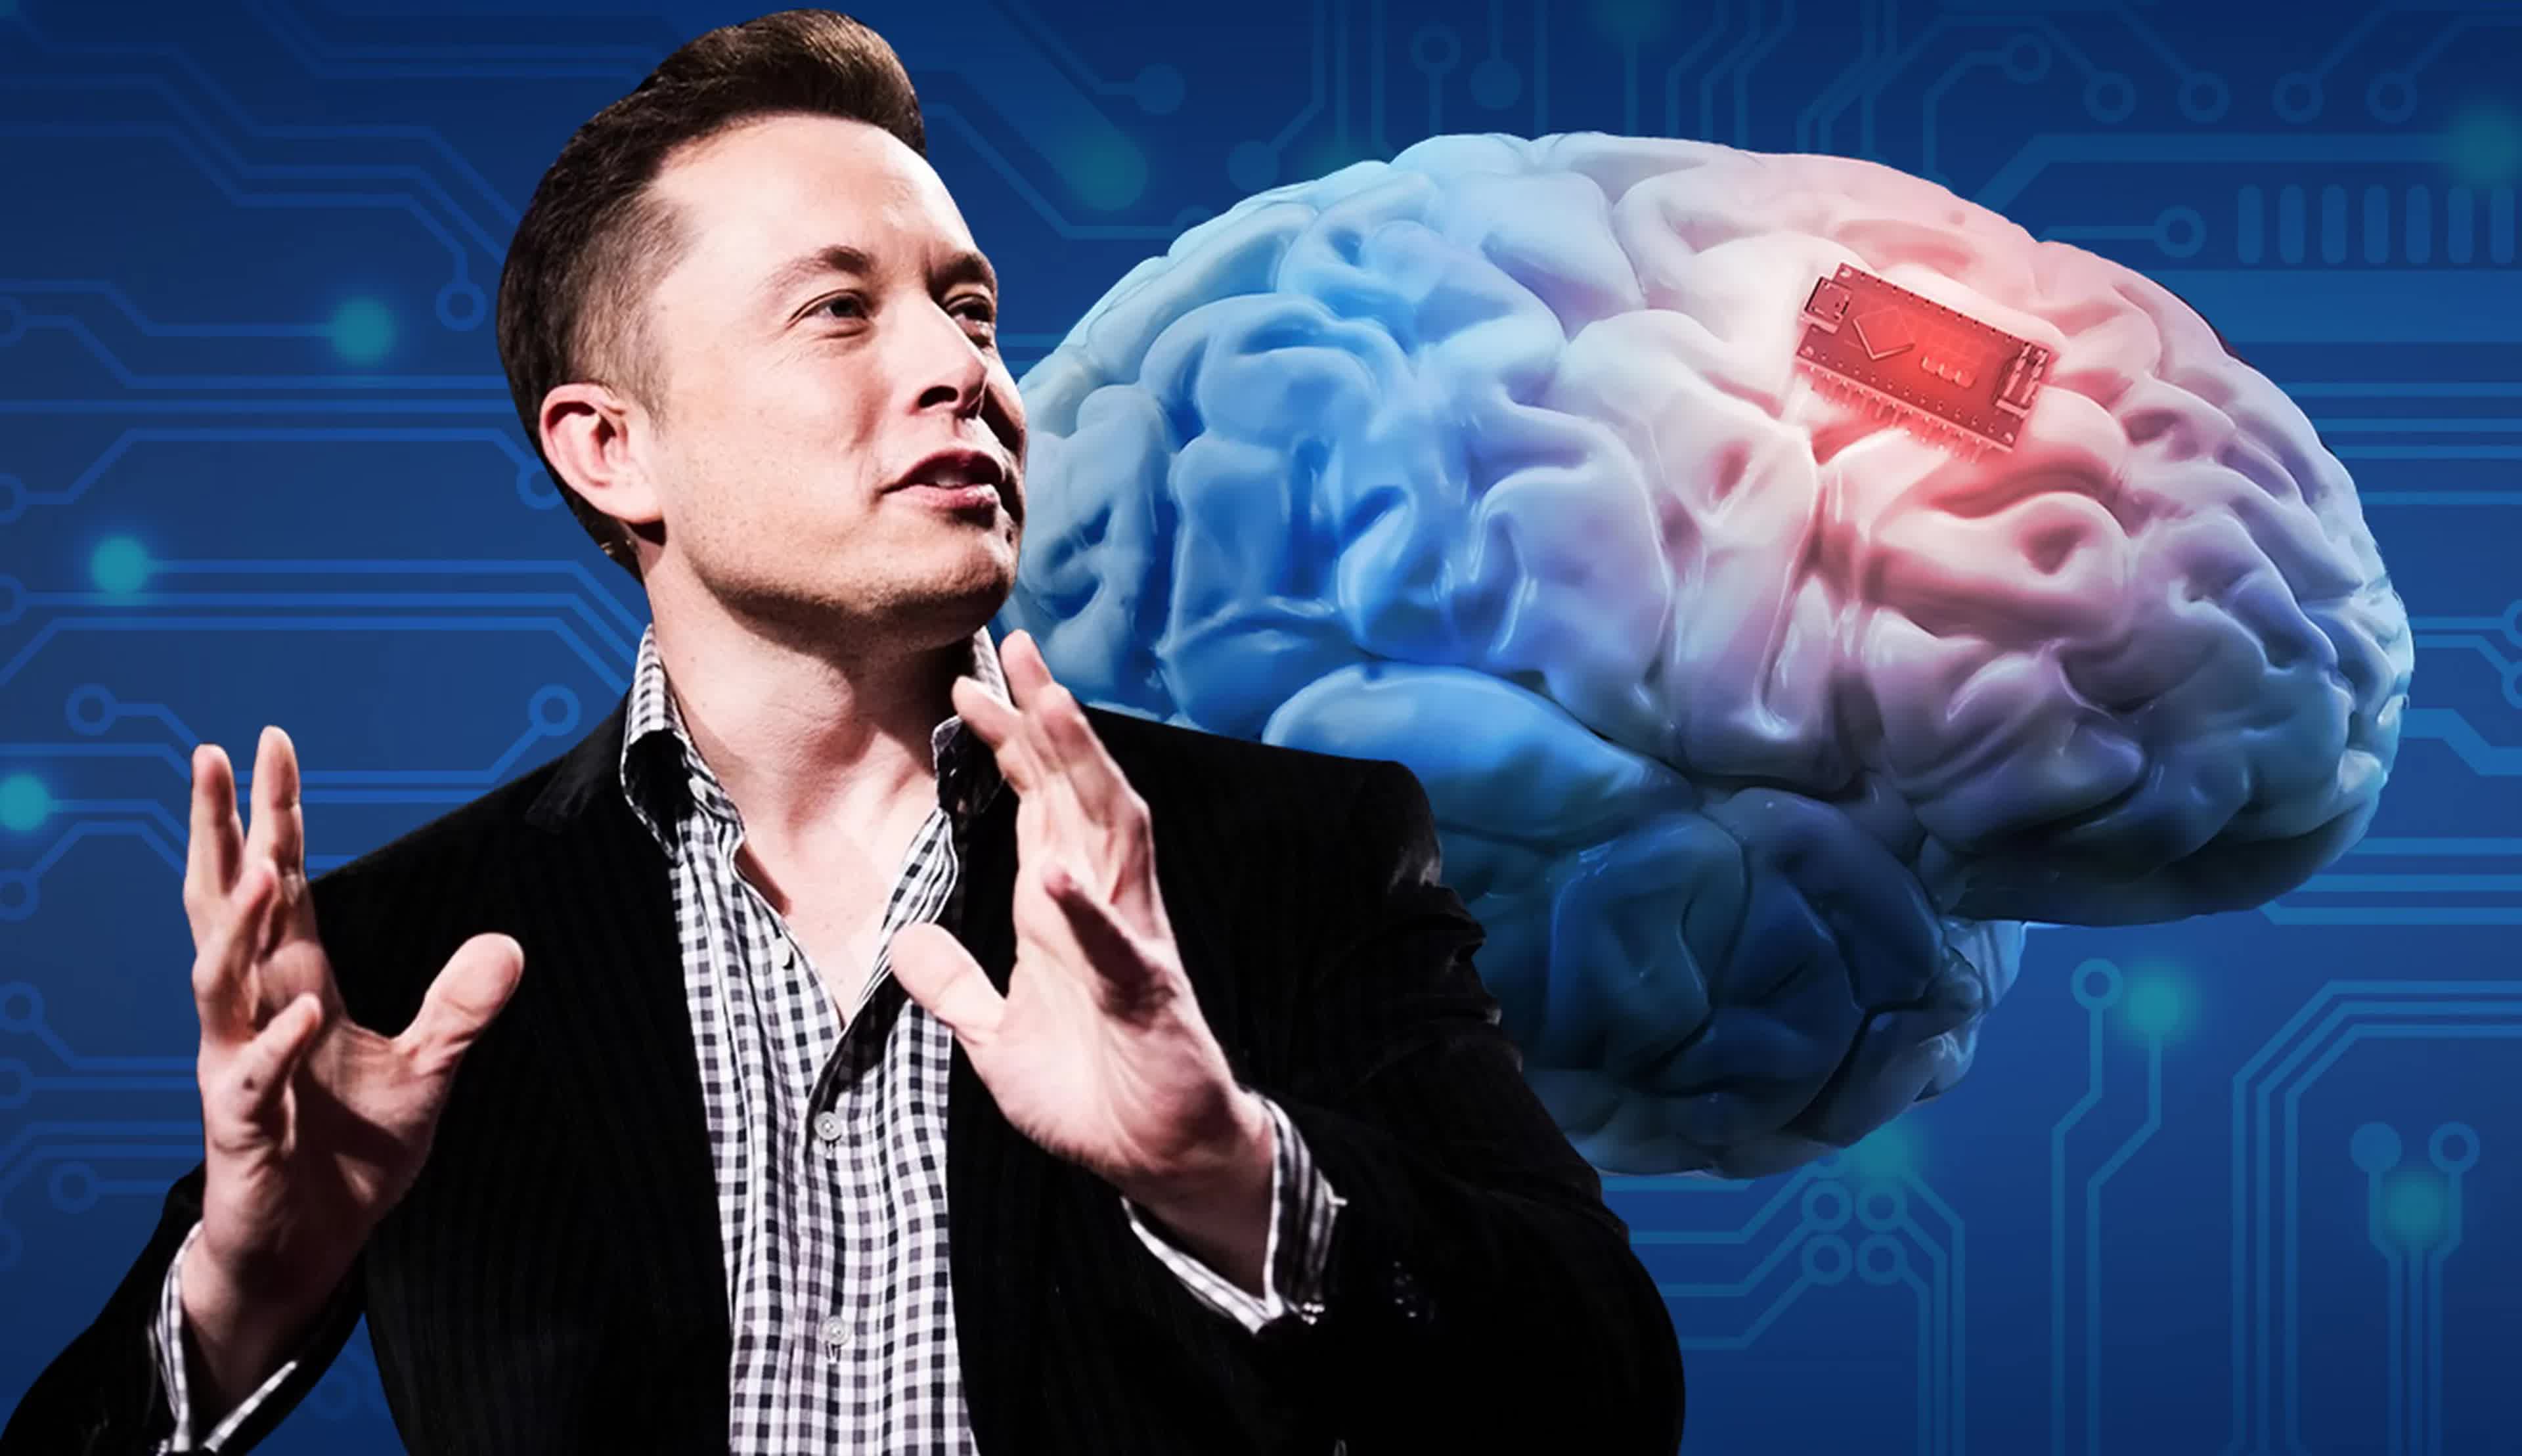 The FDA gives Elon Musk's Neuralink permission to put brain implants in humans